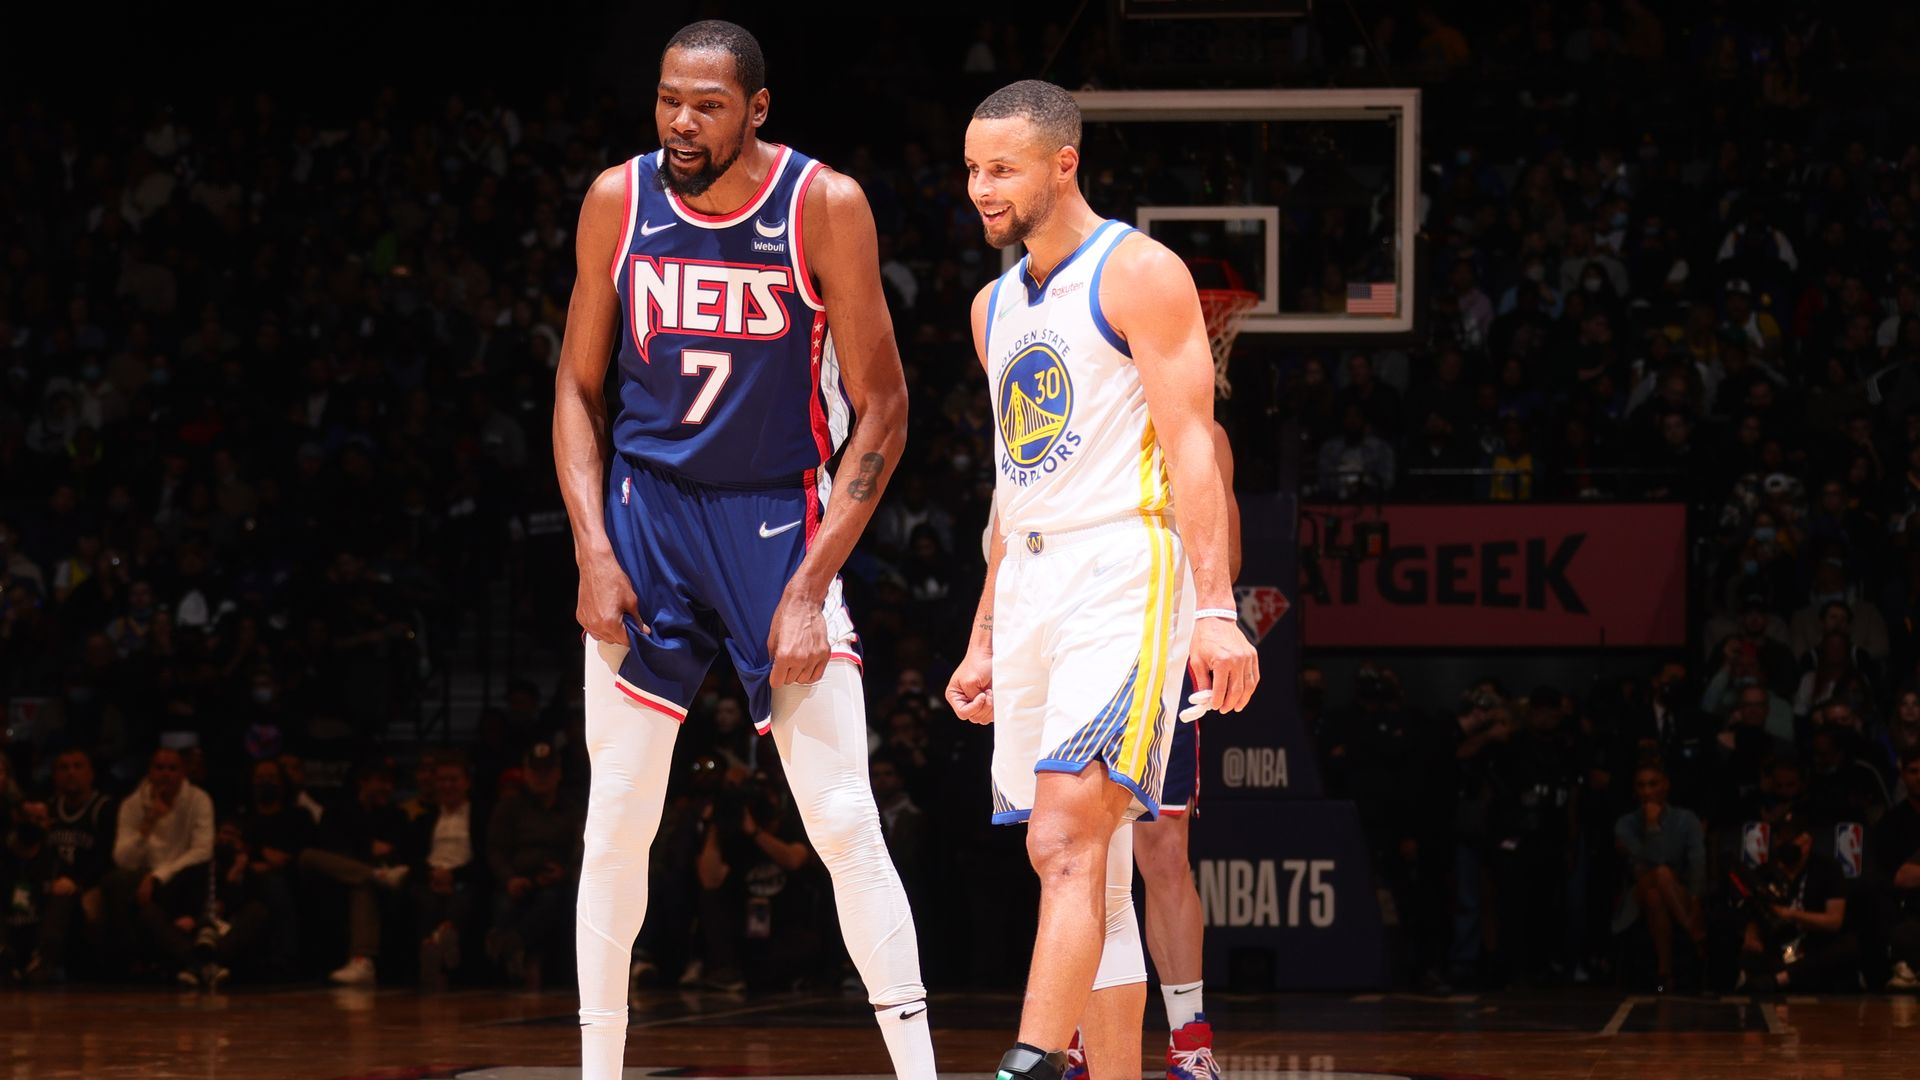 Steph Curry and KD